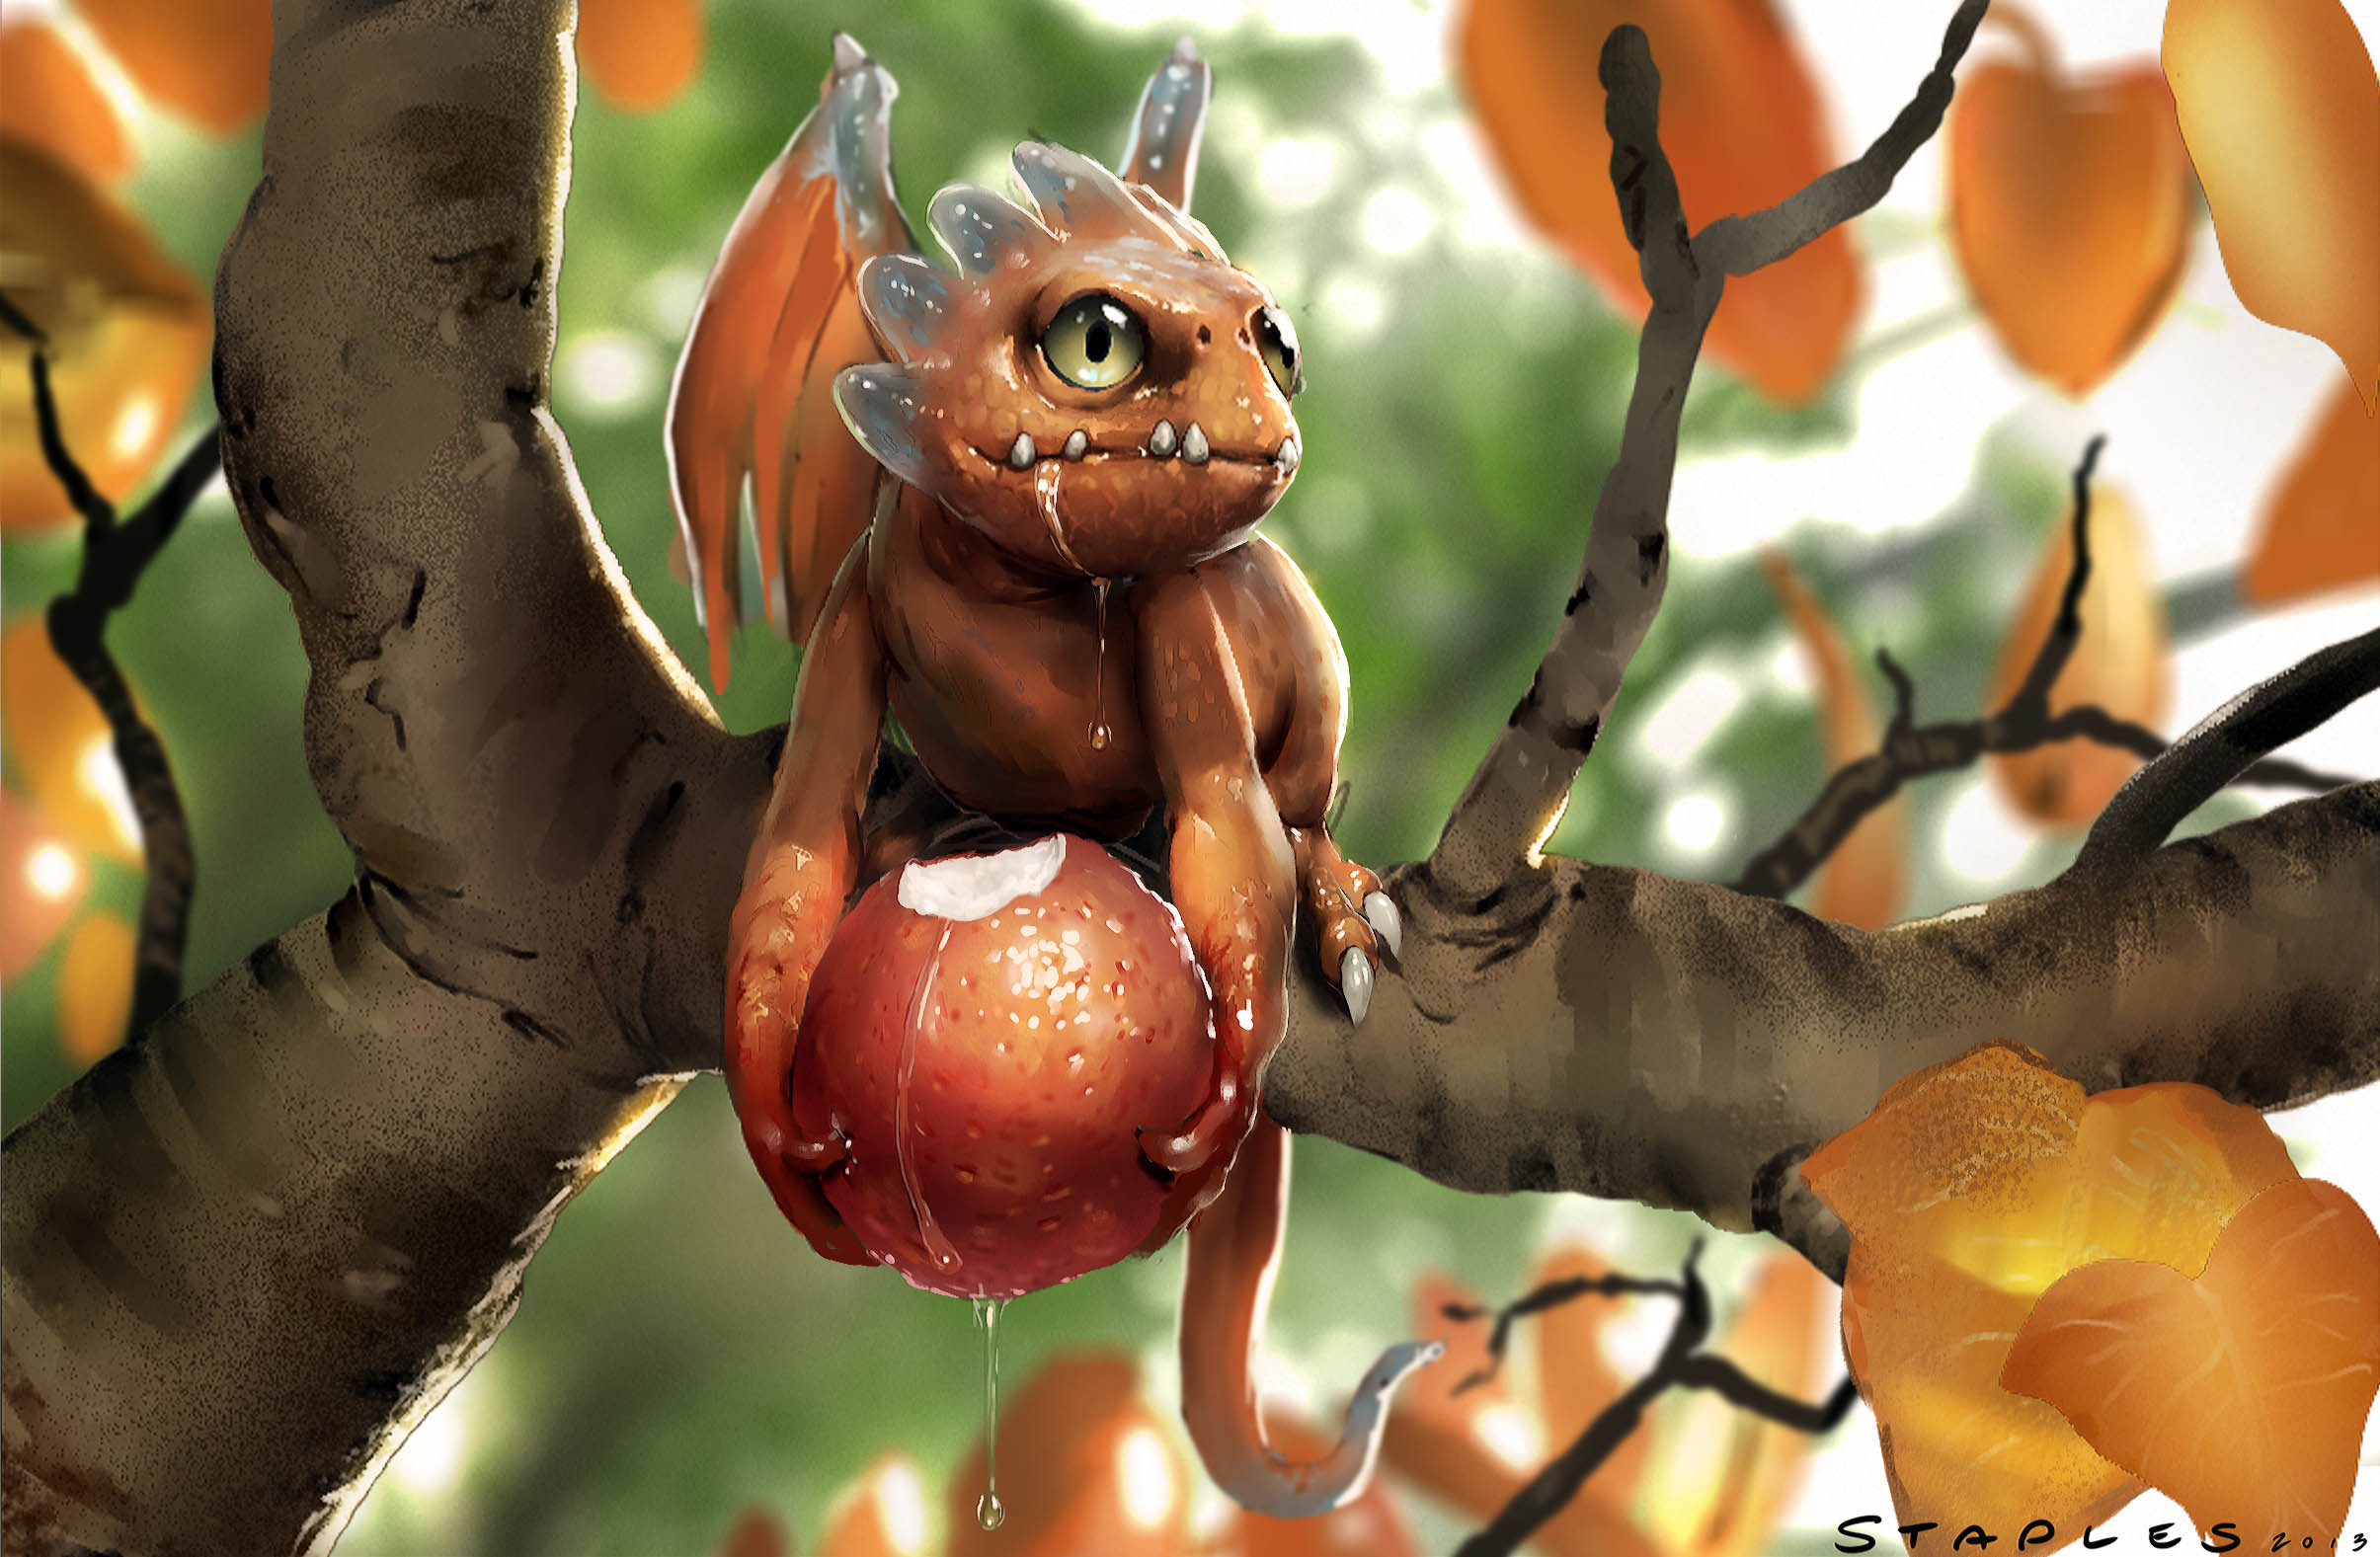 Cute Baby Dragon Art Photoshop Painting Berry Fantasy